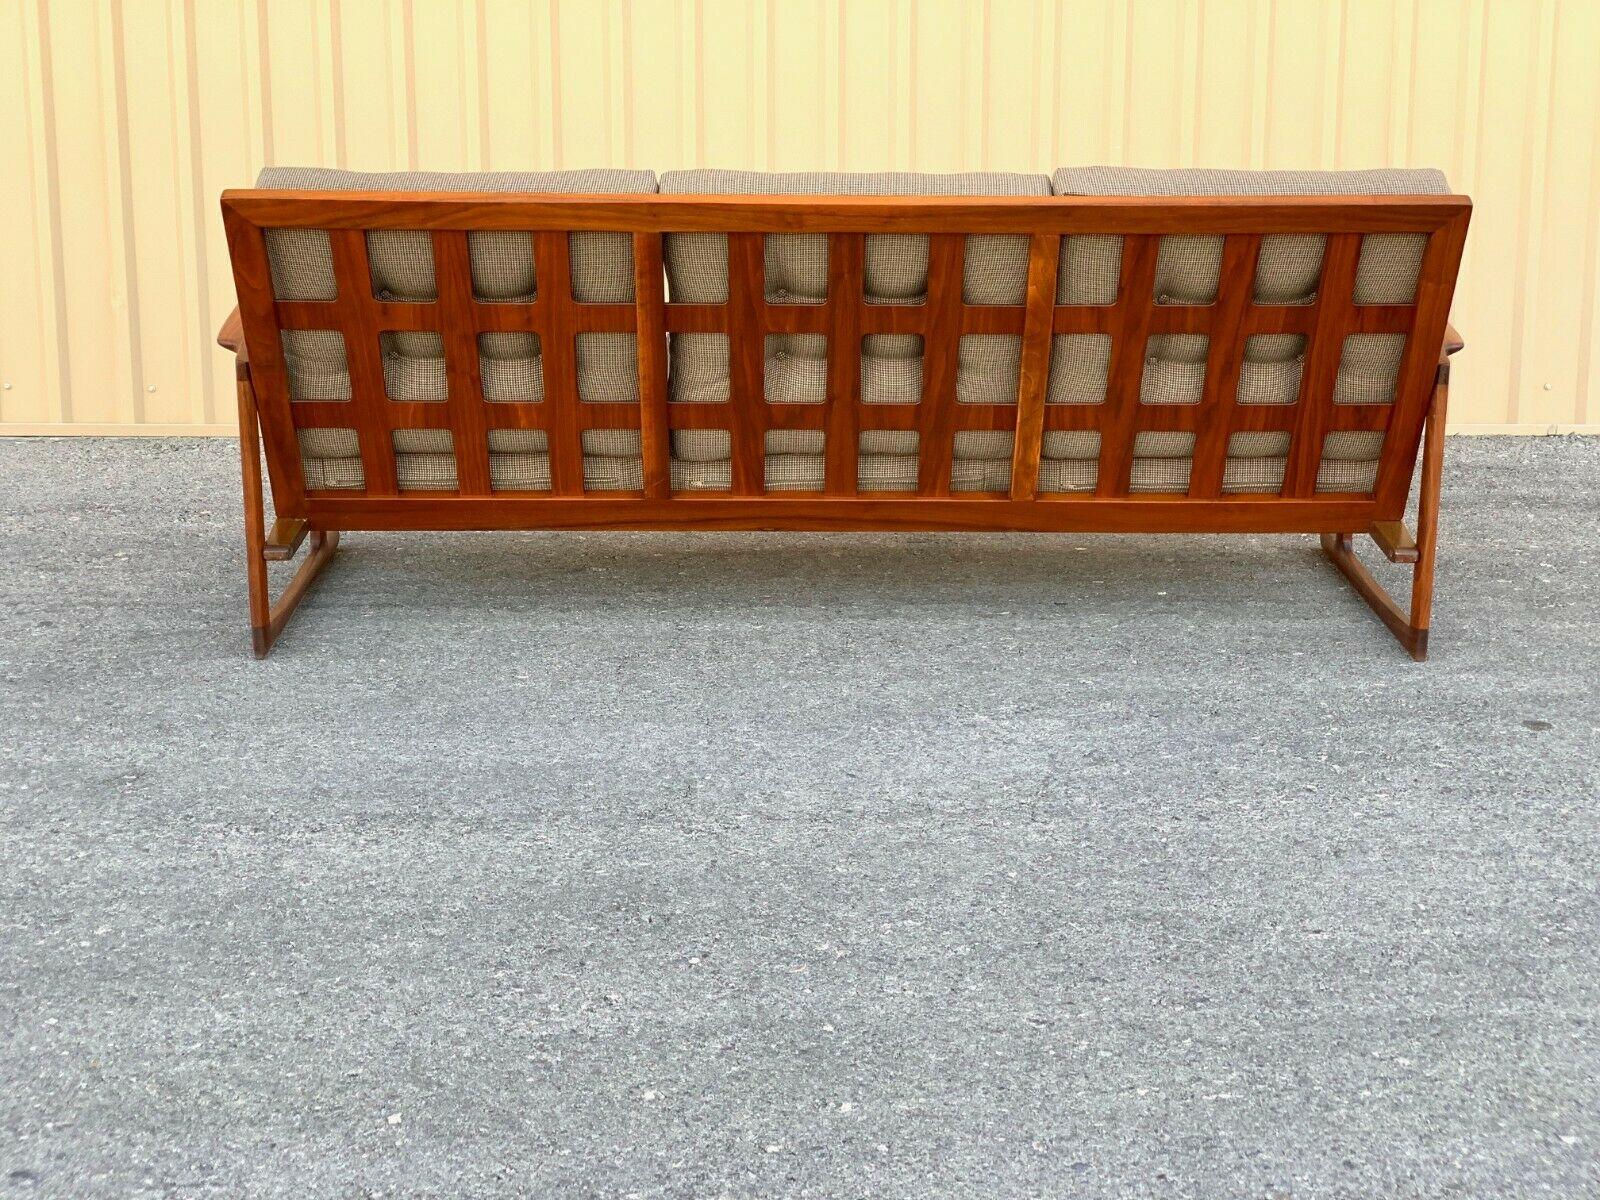 Vintage, mid century, Danish modern, sofa designed by Ib Kofod-Larsen for Selig features a distinct, solid Teak frame with lattice back and sleigh leg base. 

“In excellent condition frame has been Professionally refinished. Upholstery in good